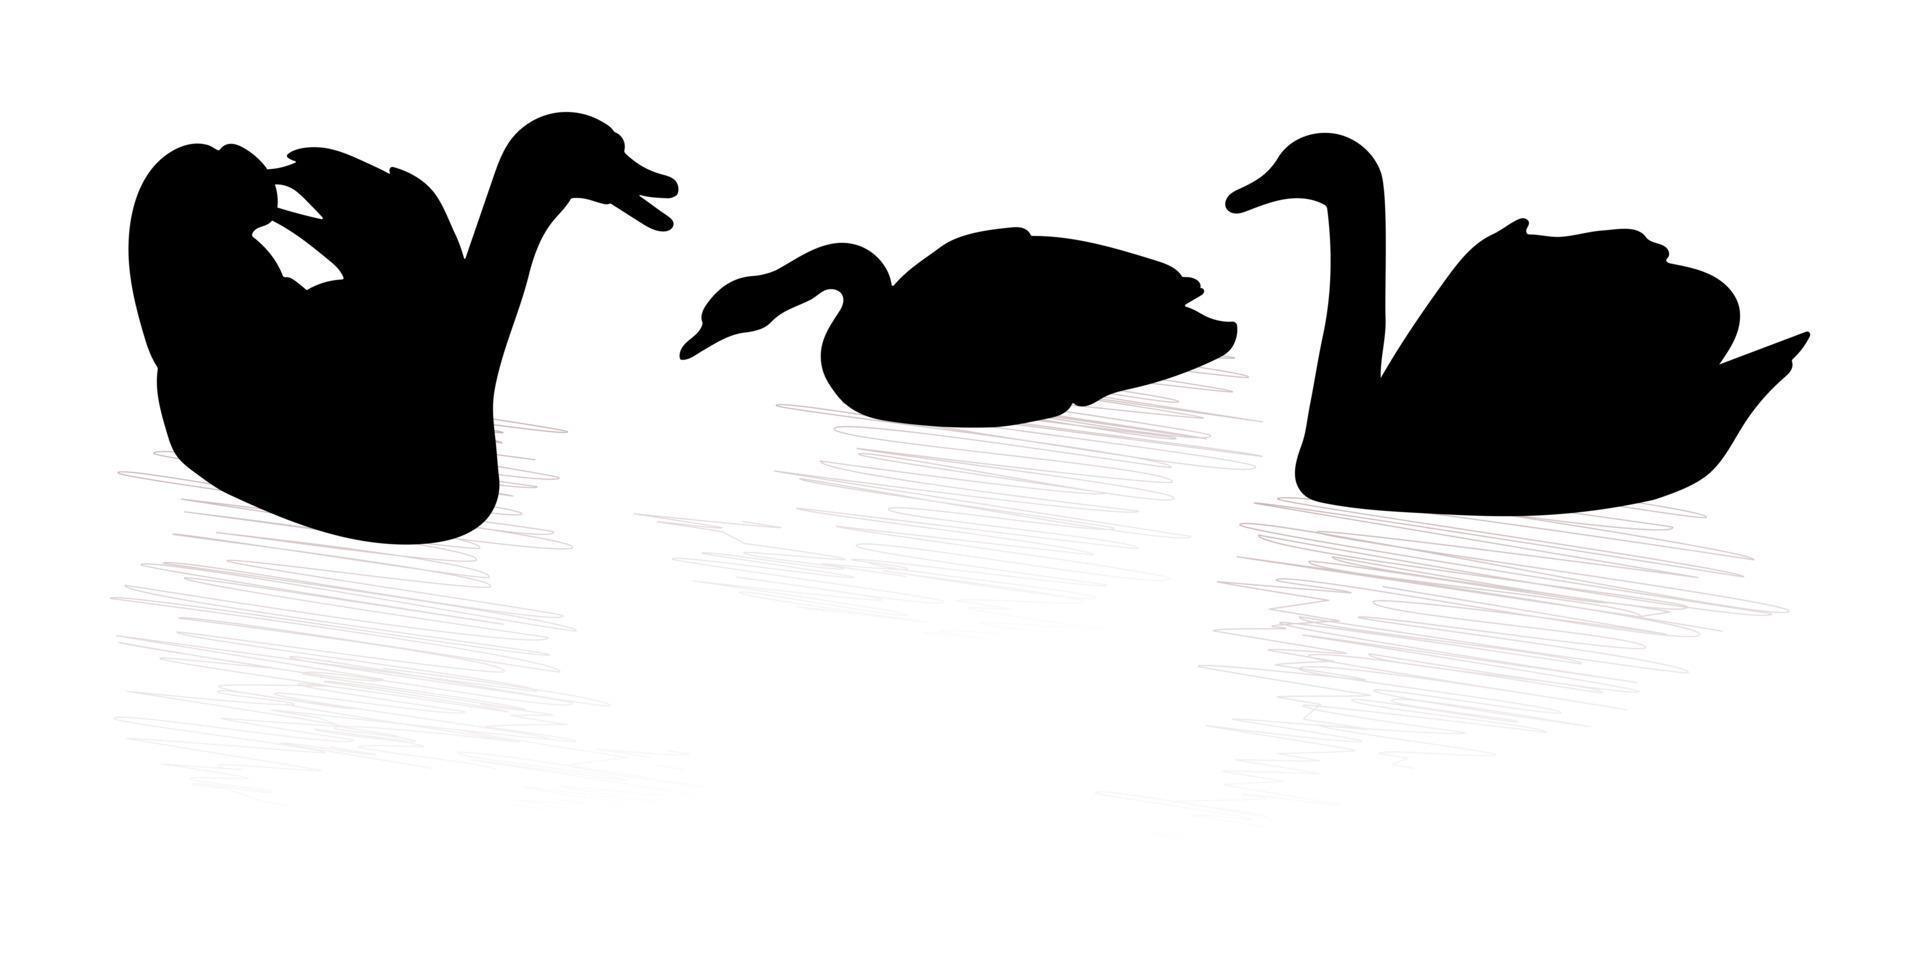 Swans floating silhouettes design vector